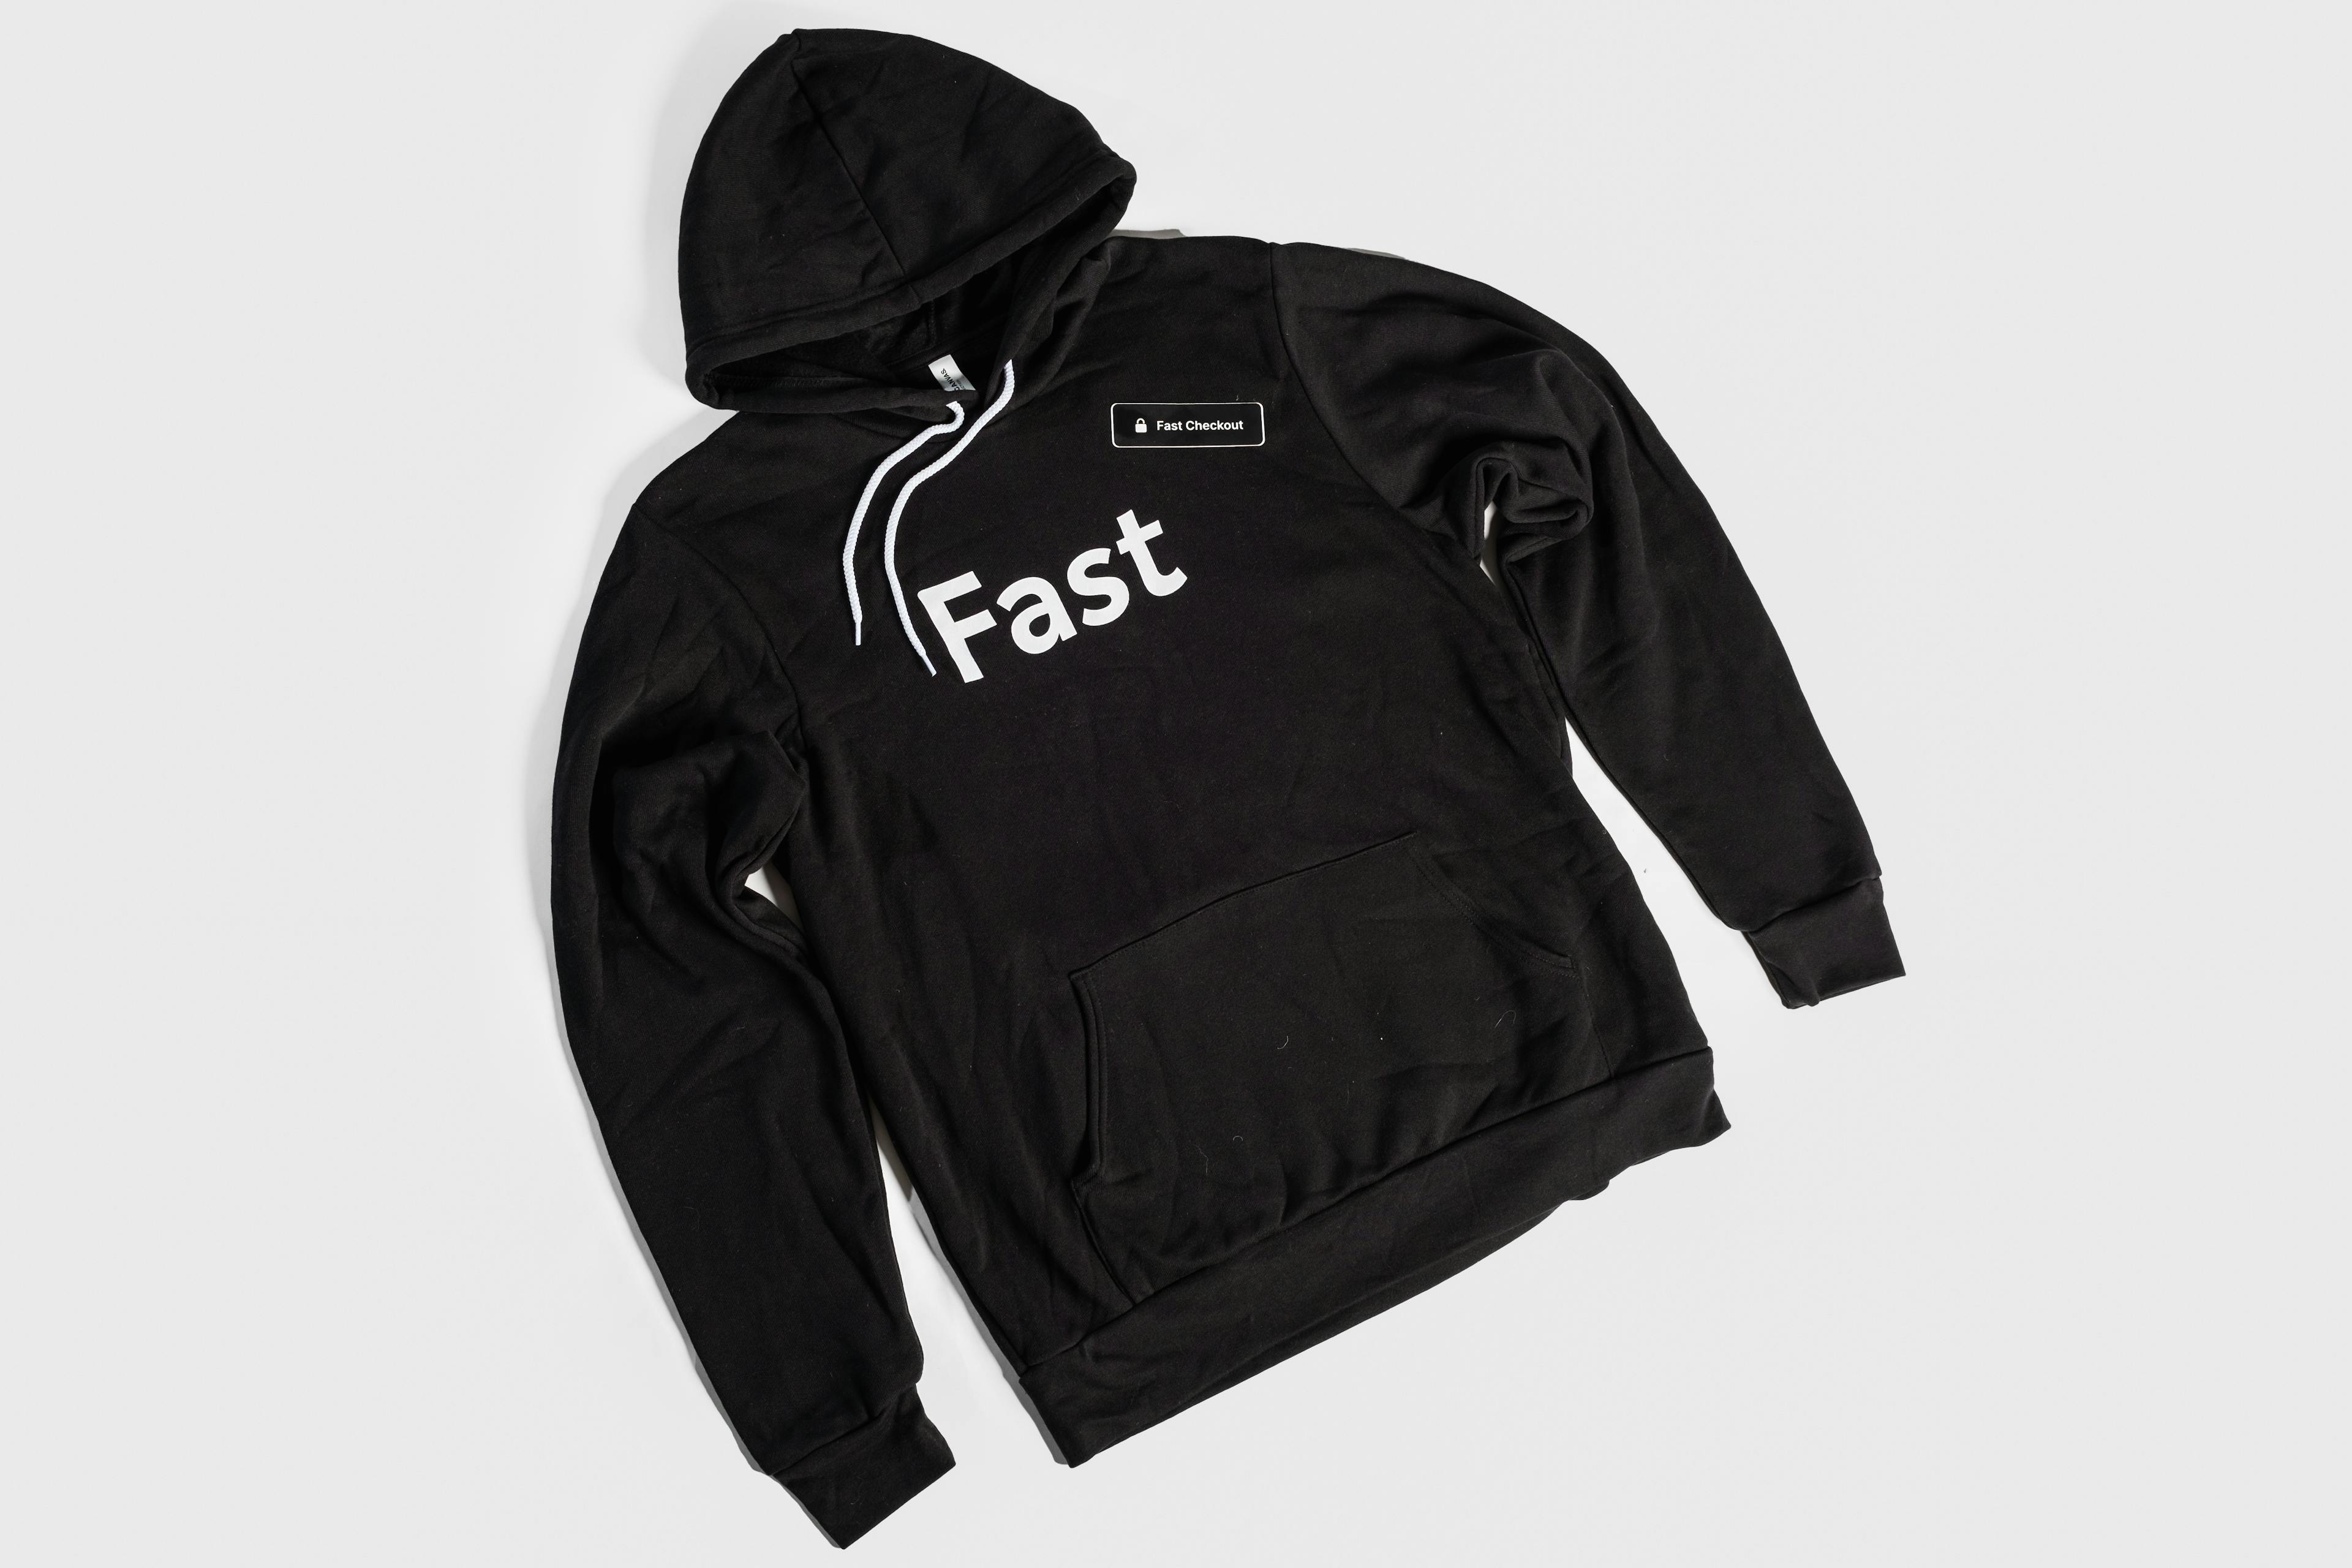 A photograph of a FAST hoodie.